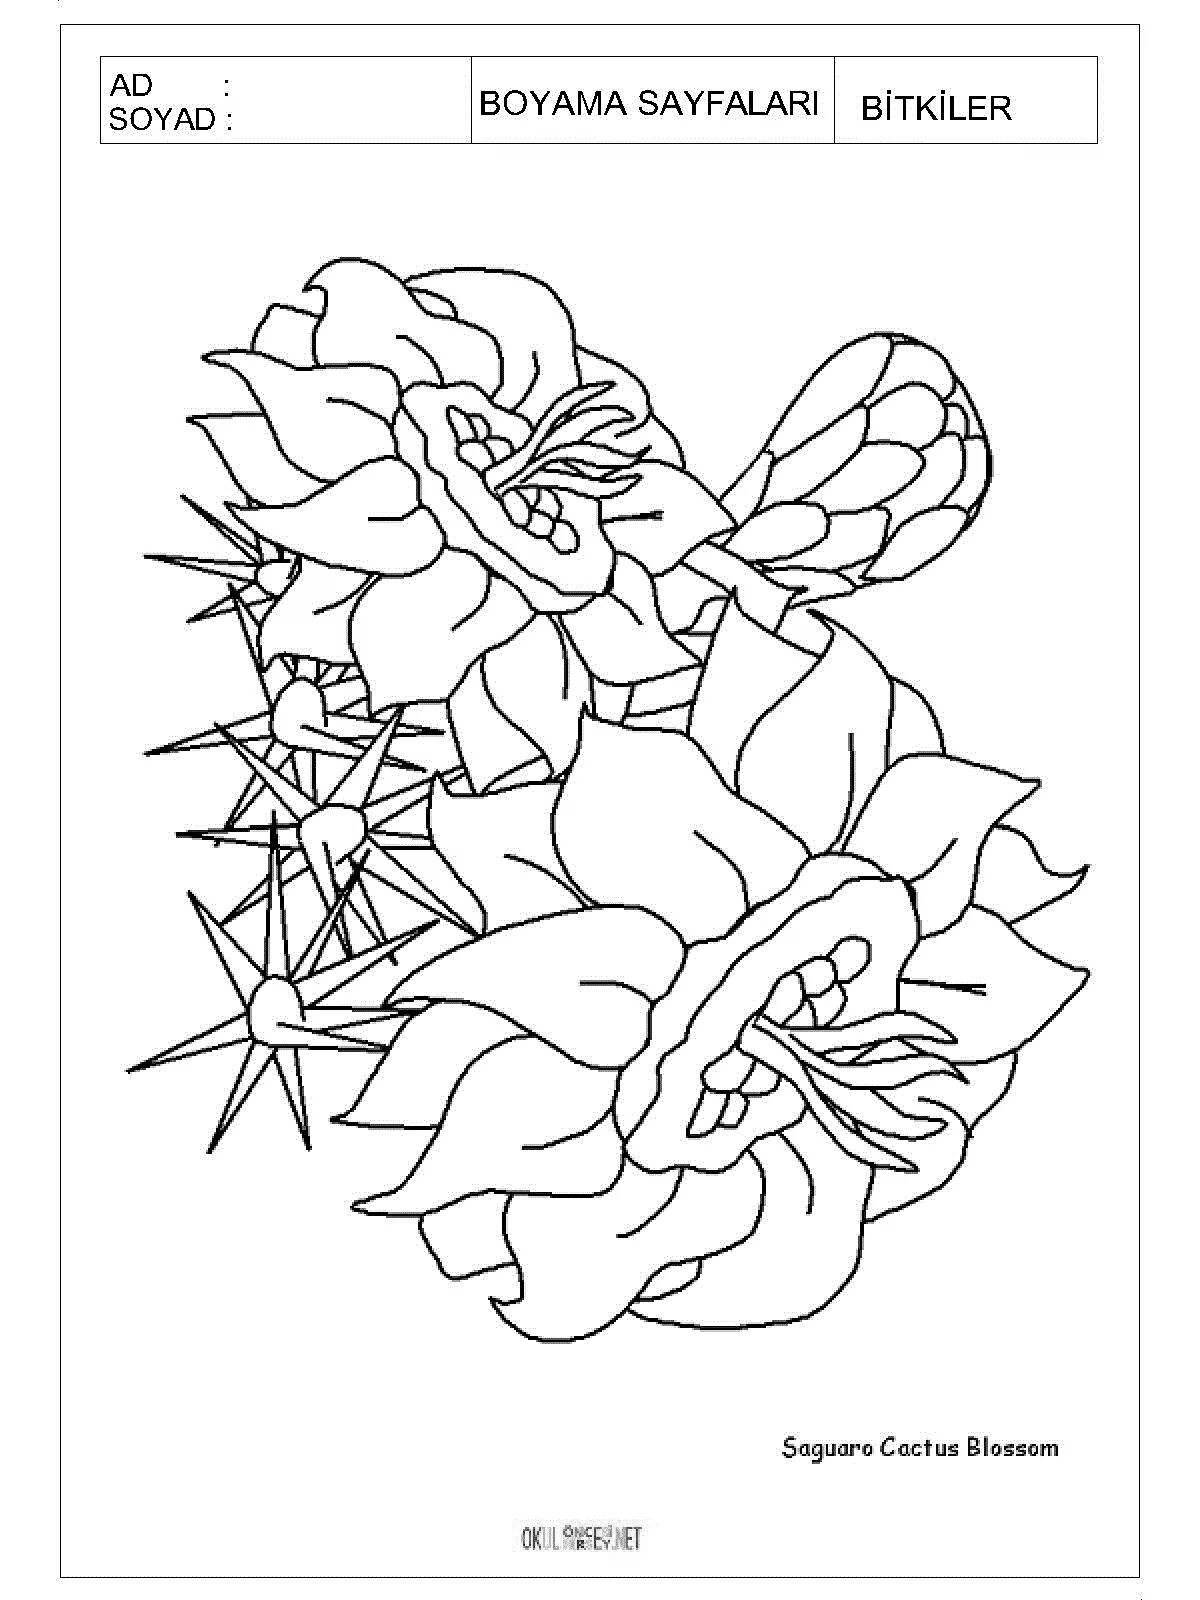 Shiny stone flower coloring book for kids